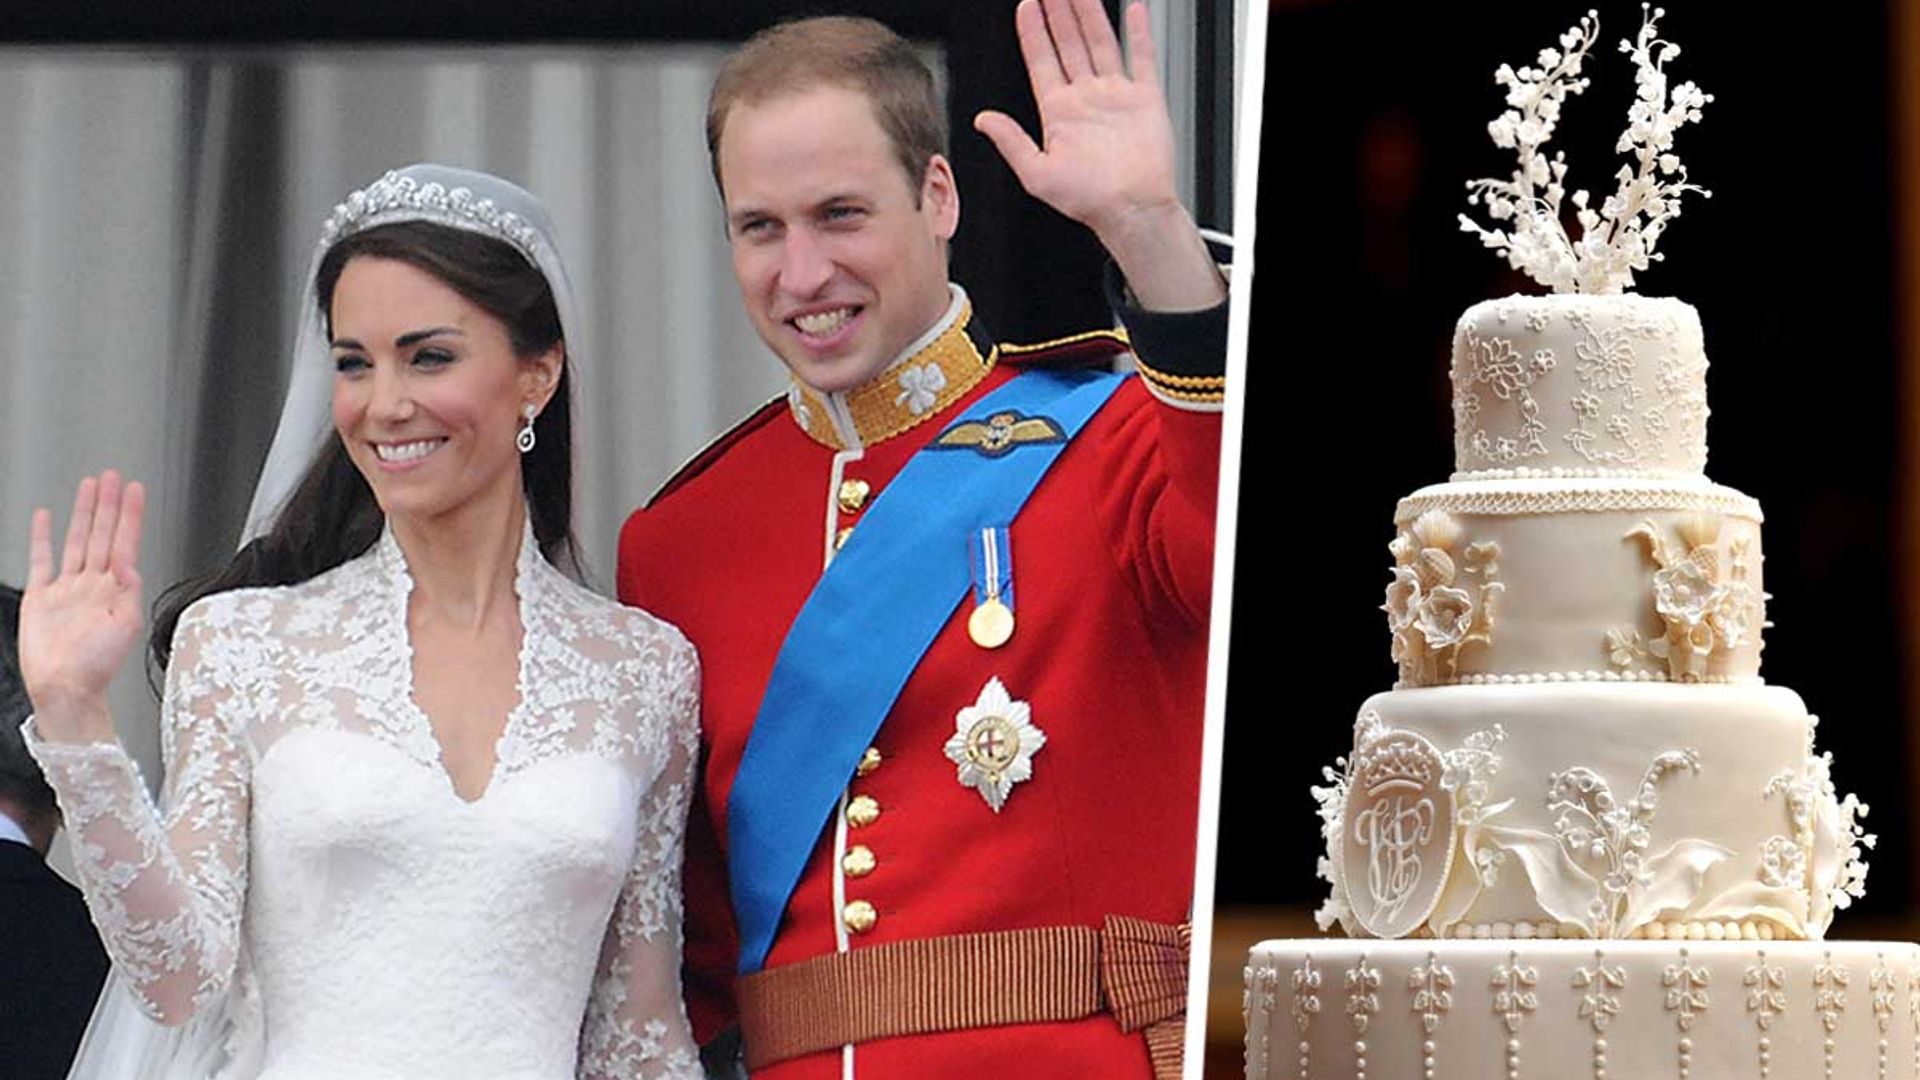 Why Kate Middleton and Prince William's wedding cake divided royal fans - royal chef exclusive